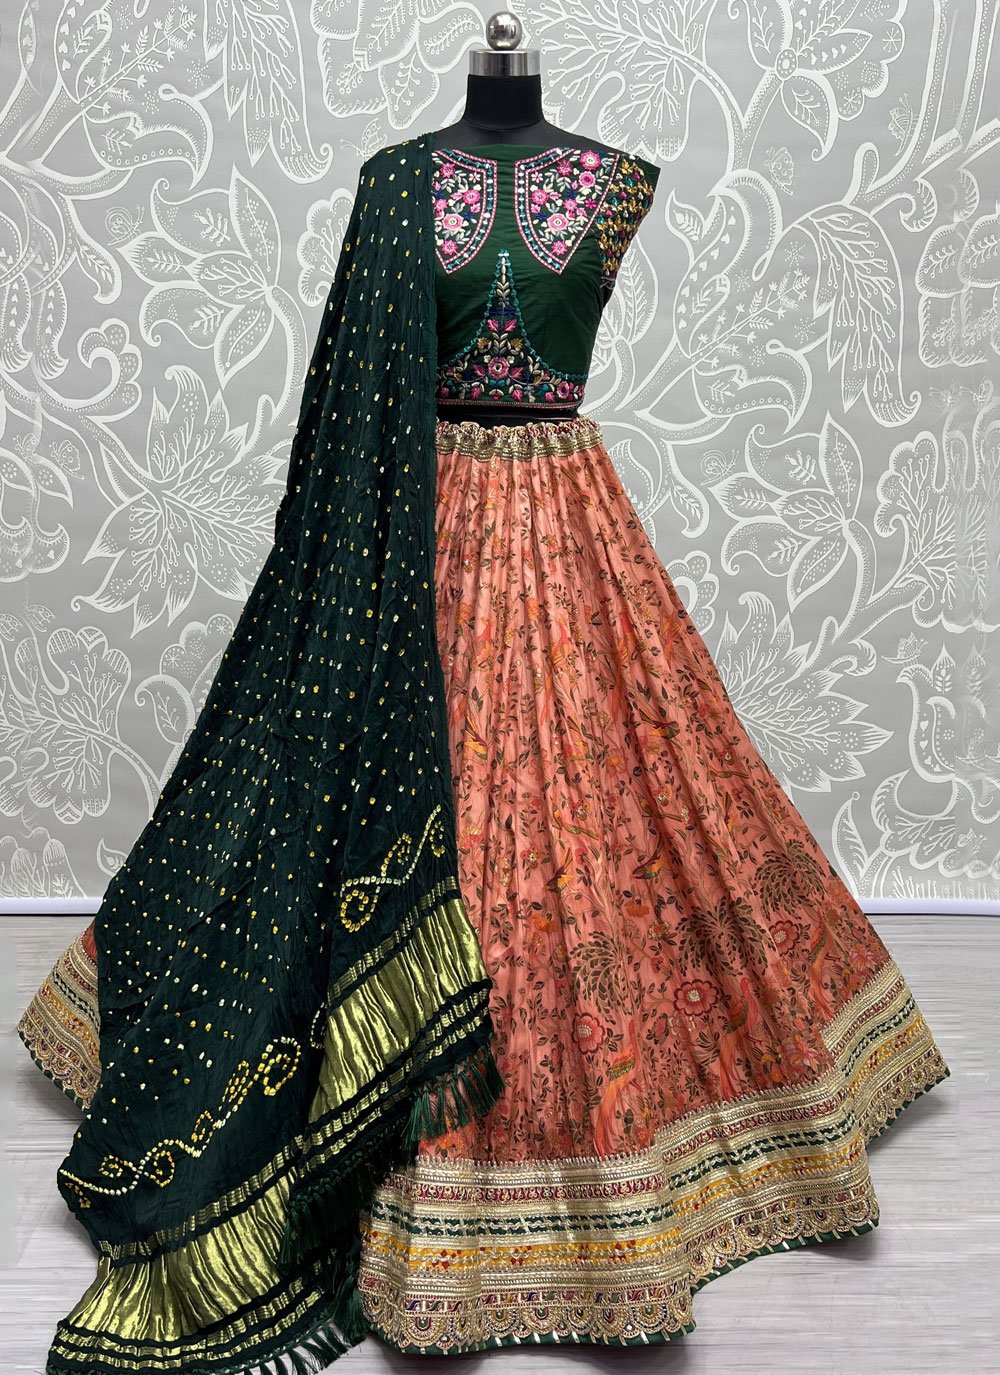 Which color dupatta is best with black lehenga? - Quora